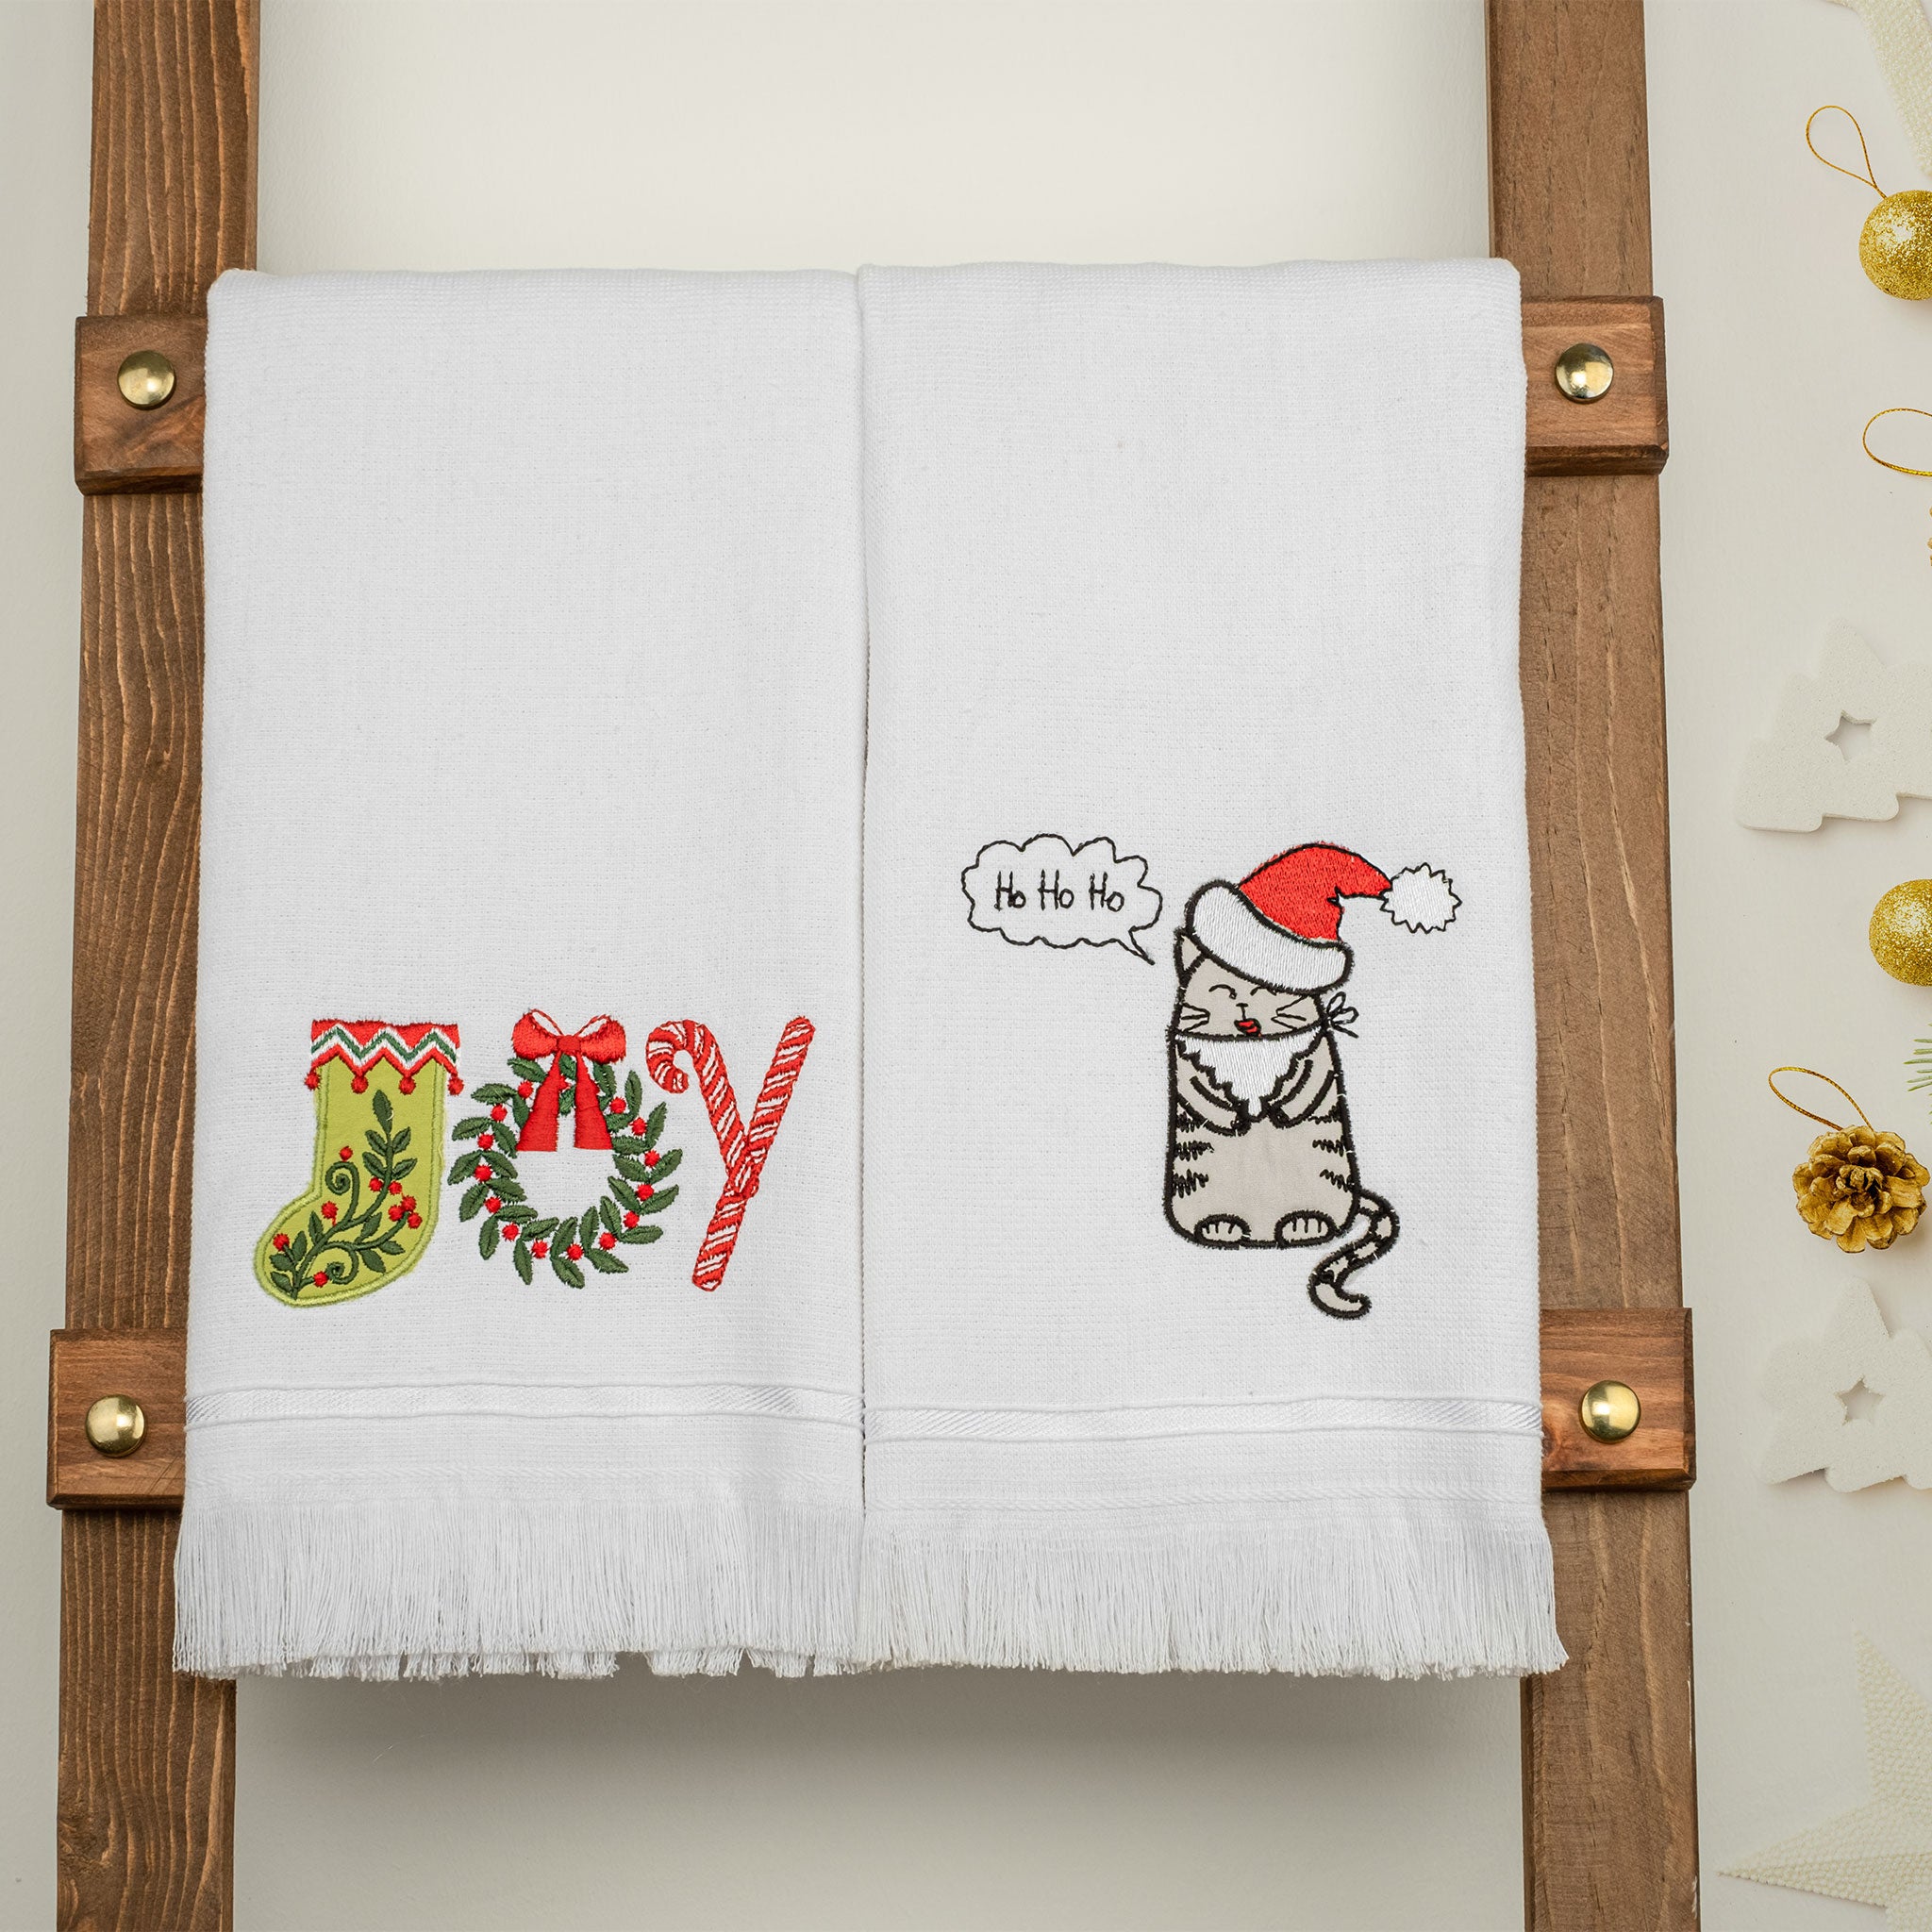  American Soft Linen - Christmas Towels Set 2 Packed Embroidered Turkish Cotton Hand Towels - Joy Cat - 5